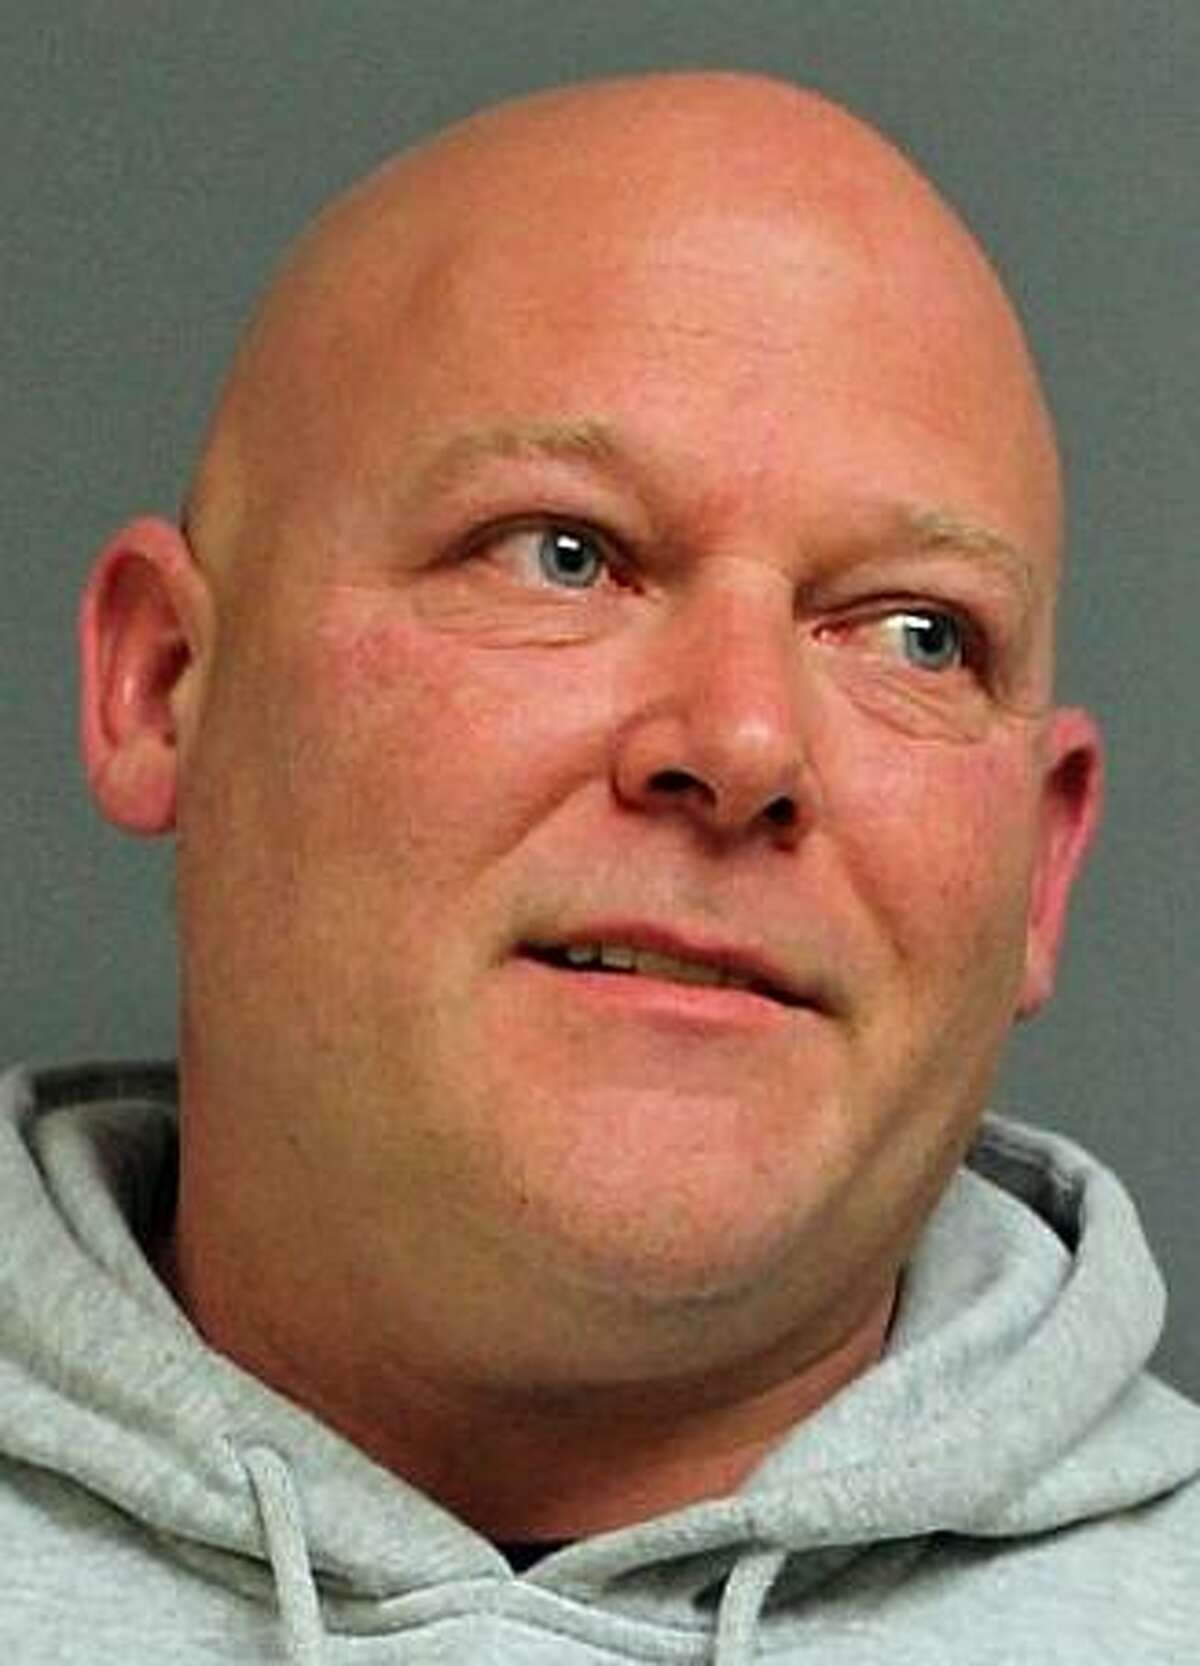 Gregory Bomba, 45, a former fire captain, who lives in Newtown surrendered himself to police in connection with a February fire that occurred during the dinner at Echo Hose Company #1, police said. Bomba was charged with second degree arson, second degree endangerment, second degree criminal mischief and conspiracy. Volunteer firefighter William Tortora, brother of Fire Marshal James “Chic” Tortora, was arrested last week in connection with the fire.